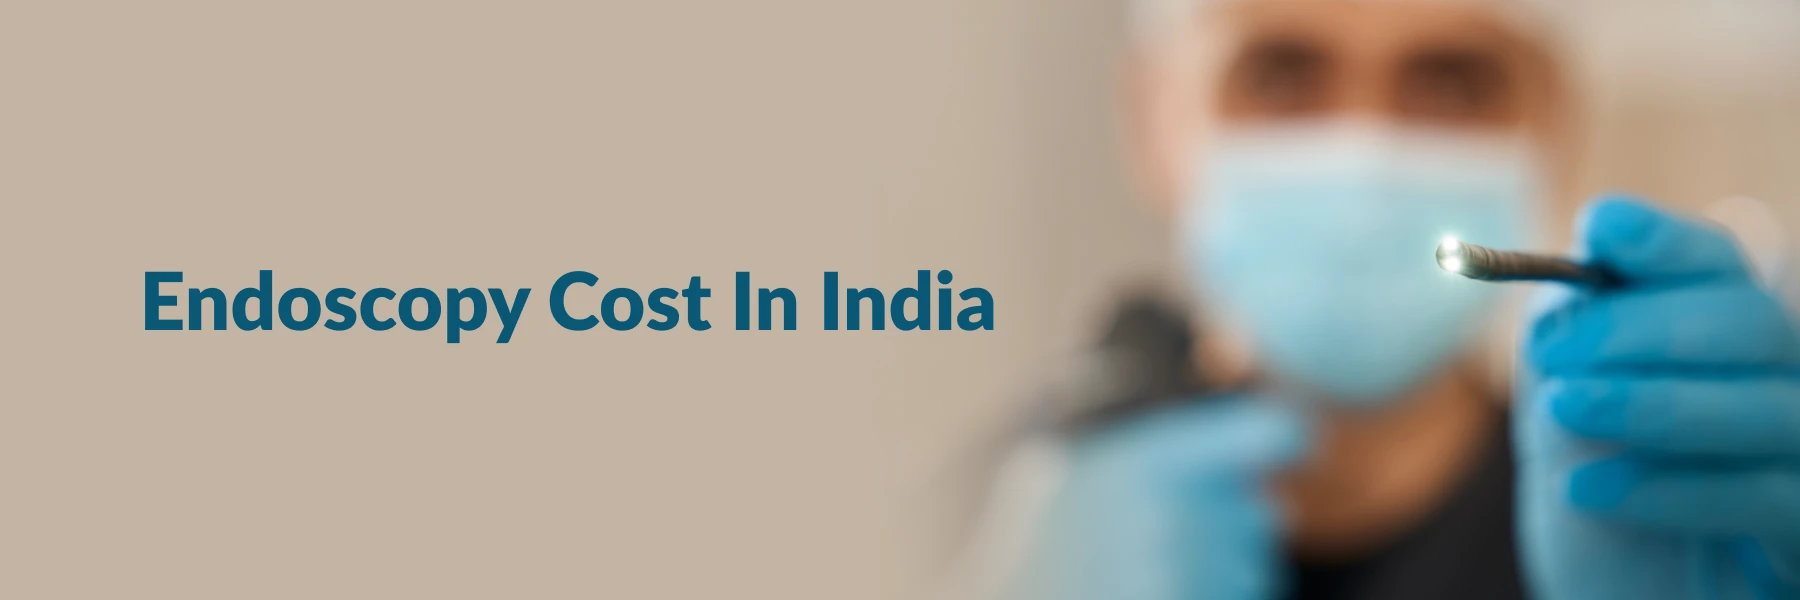 Endoscopy Cost In India